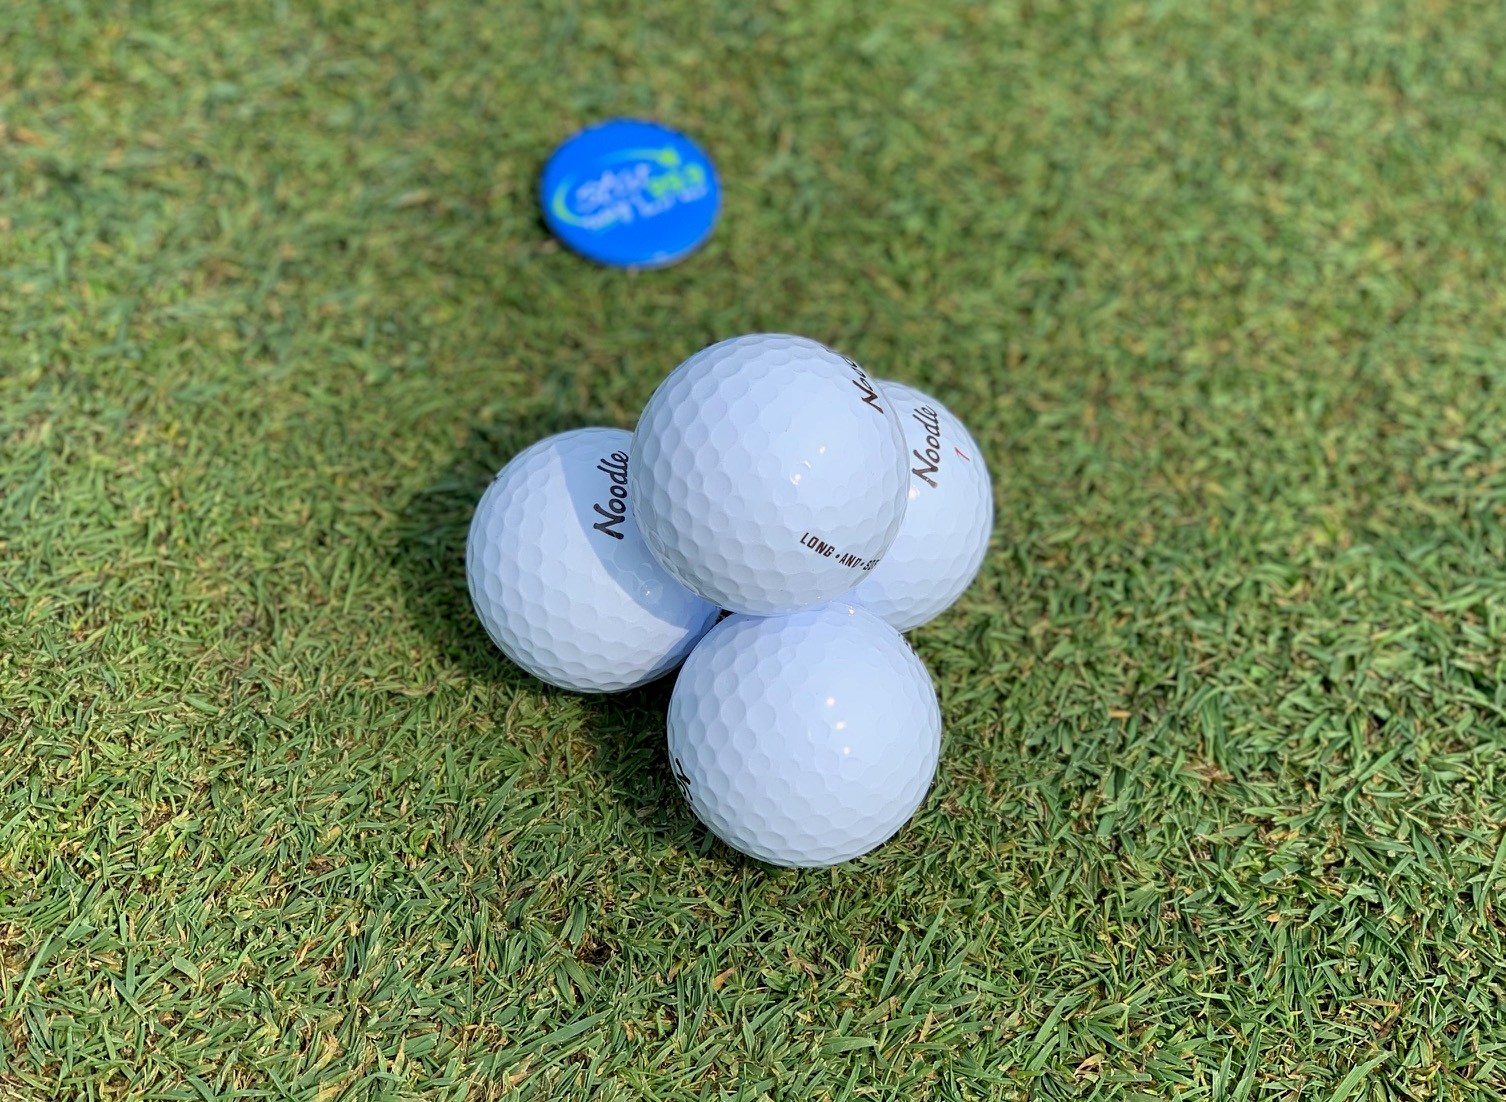 MUNDANE MYSTERIES: How many dimples are on a golf ball?